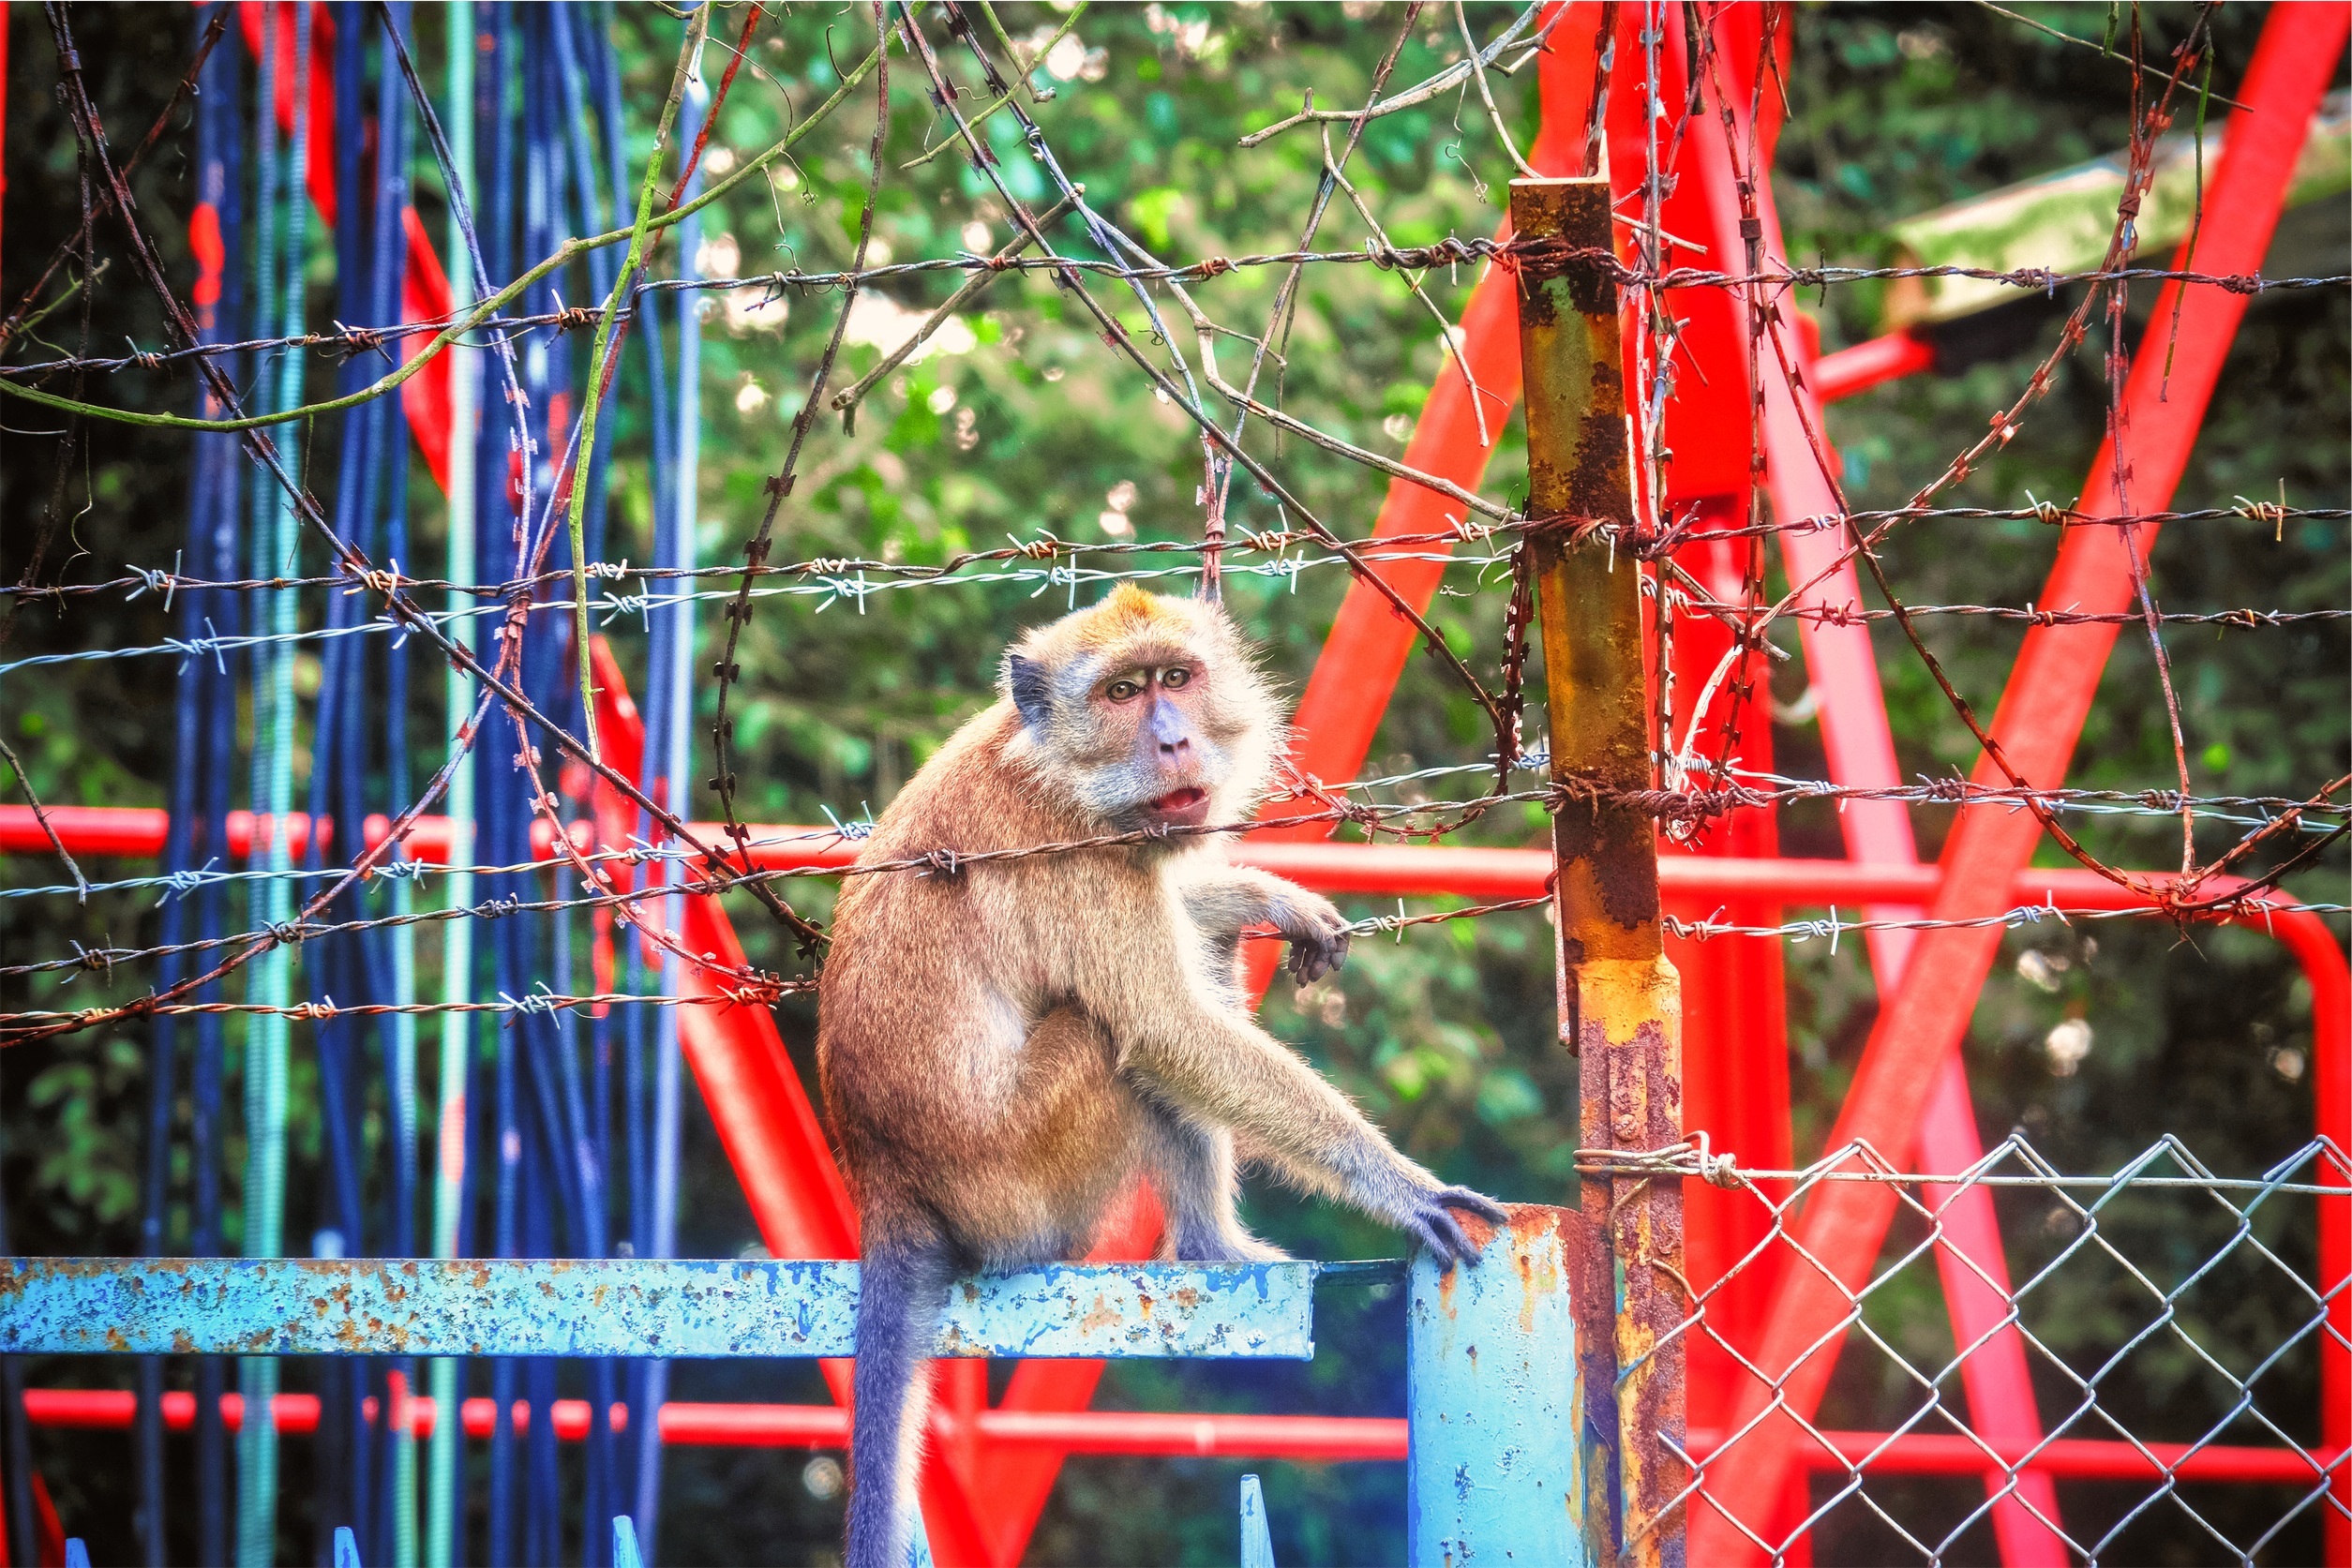 monkey, animals, zoo, barbed wire iphone wallpaper